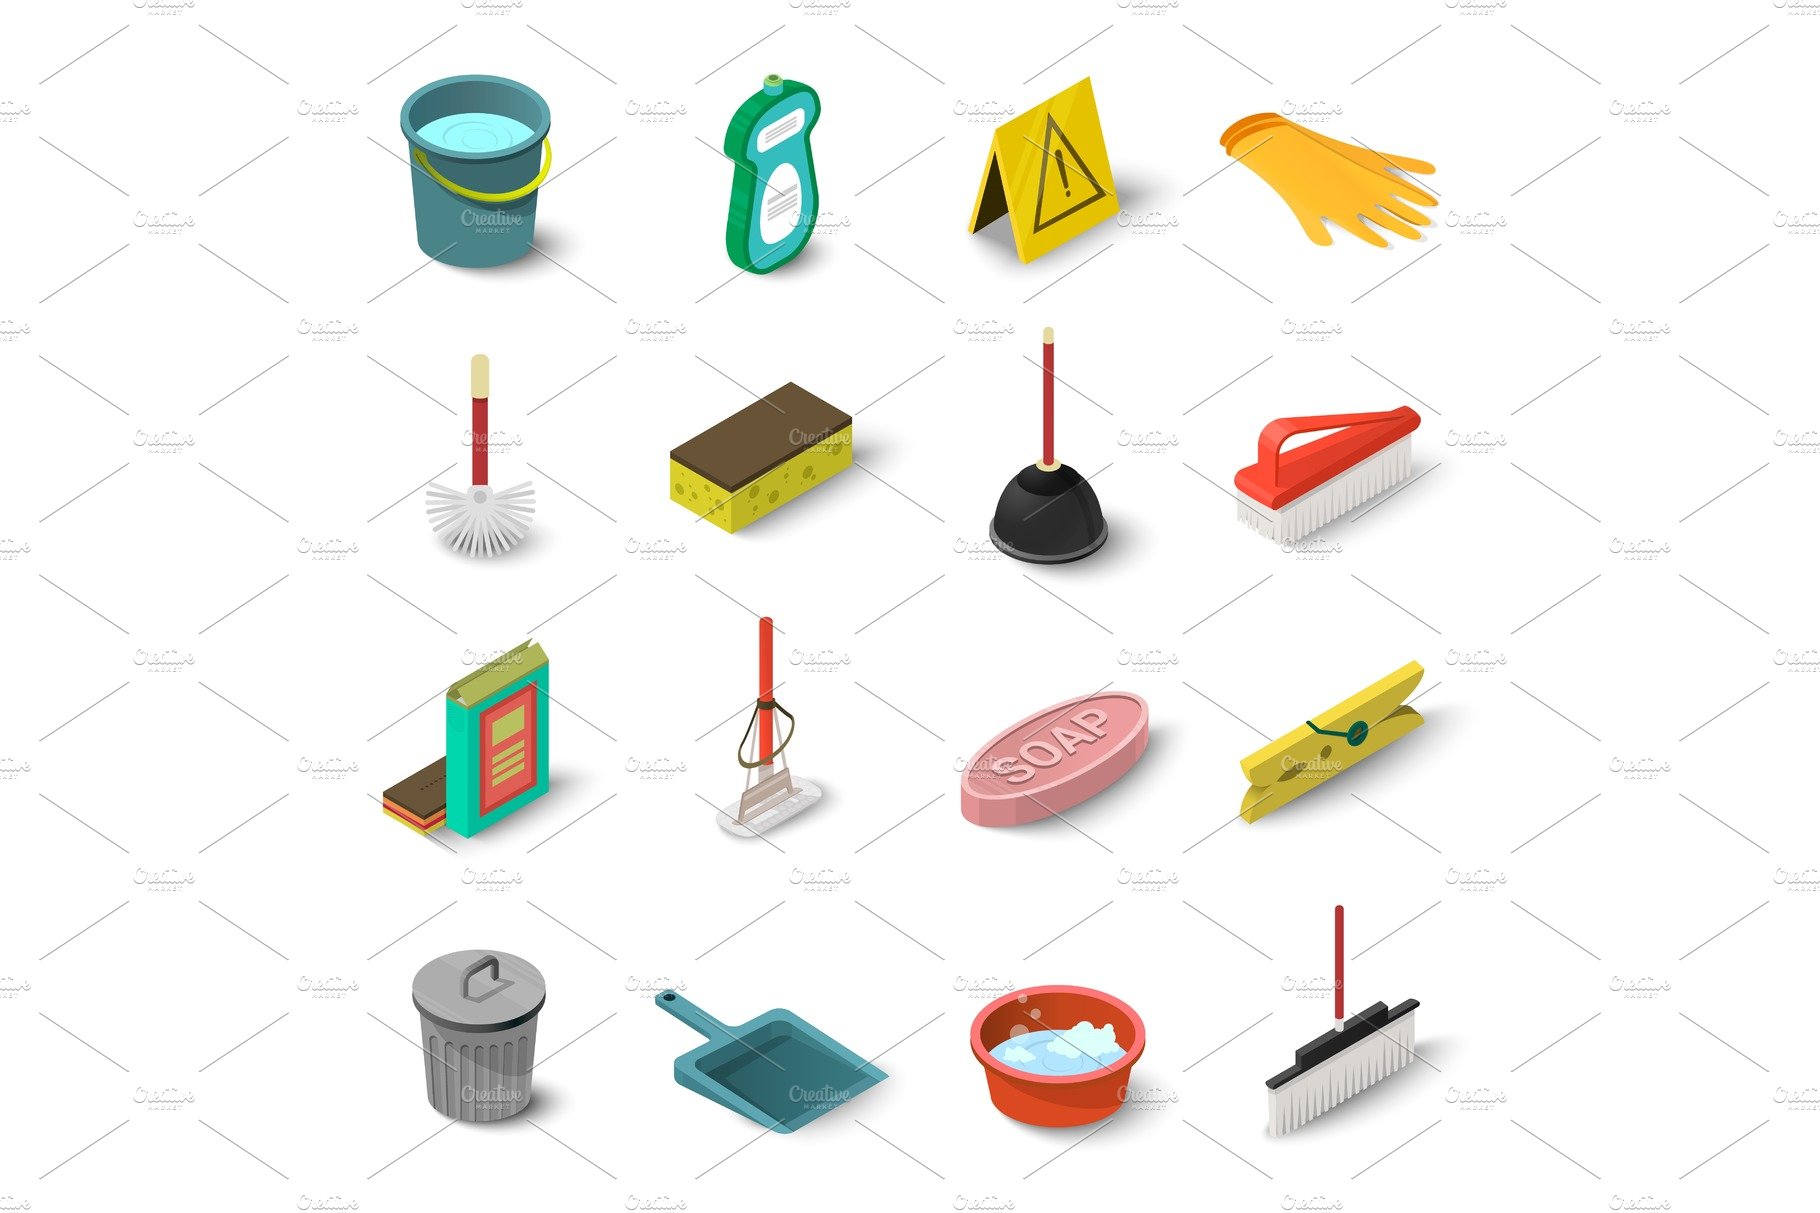 Cleaning icons set, isometric style cover image.